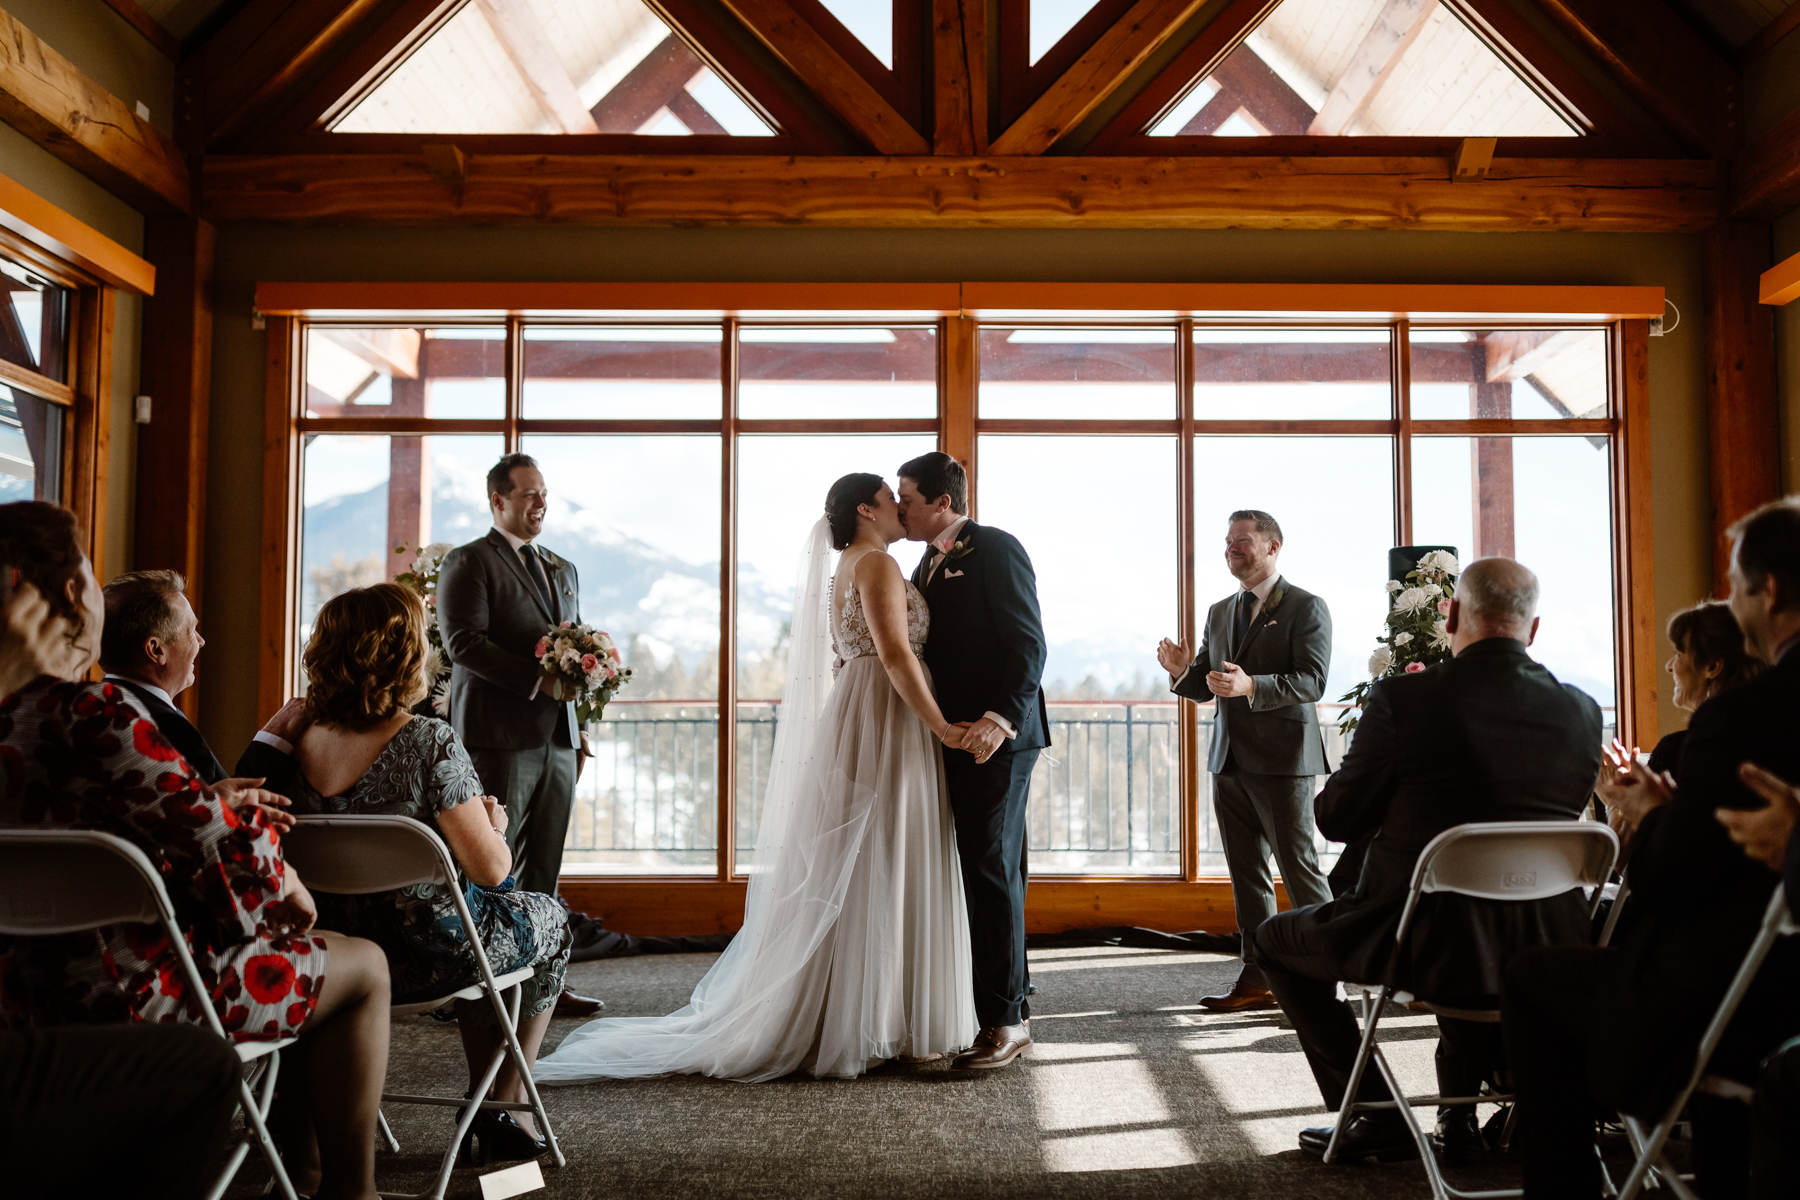 Invermere Wedding Photographers at Eagle Ranch and Panorama Ski Resort - Image 30